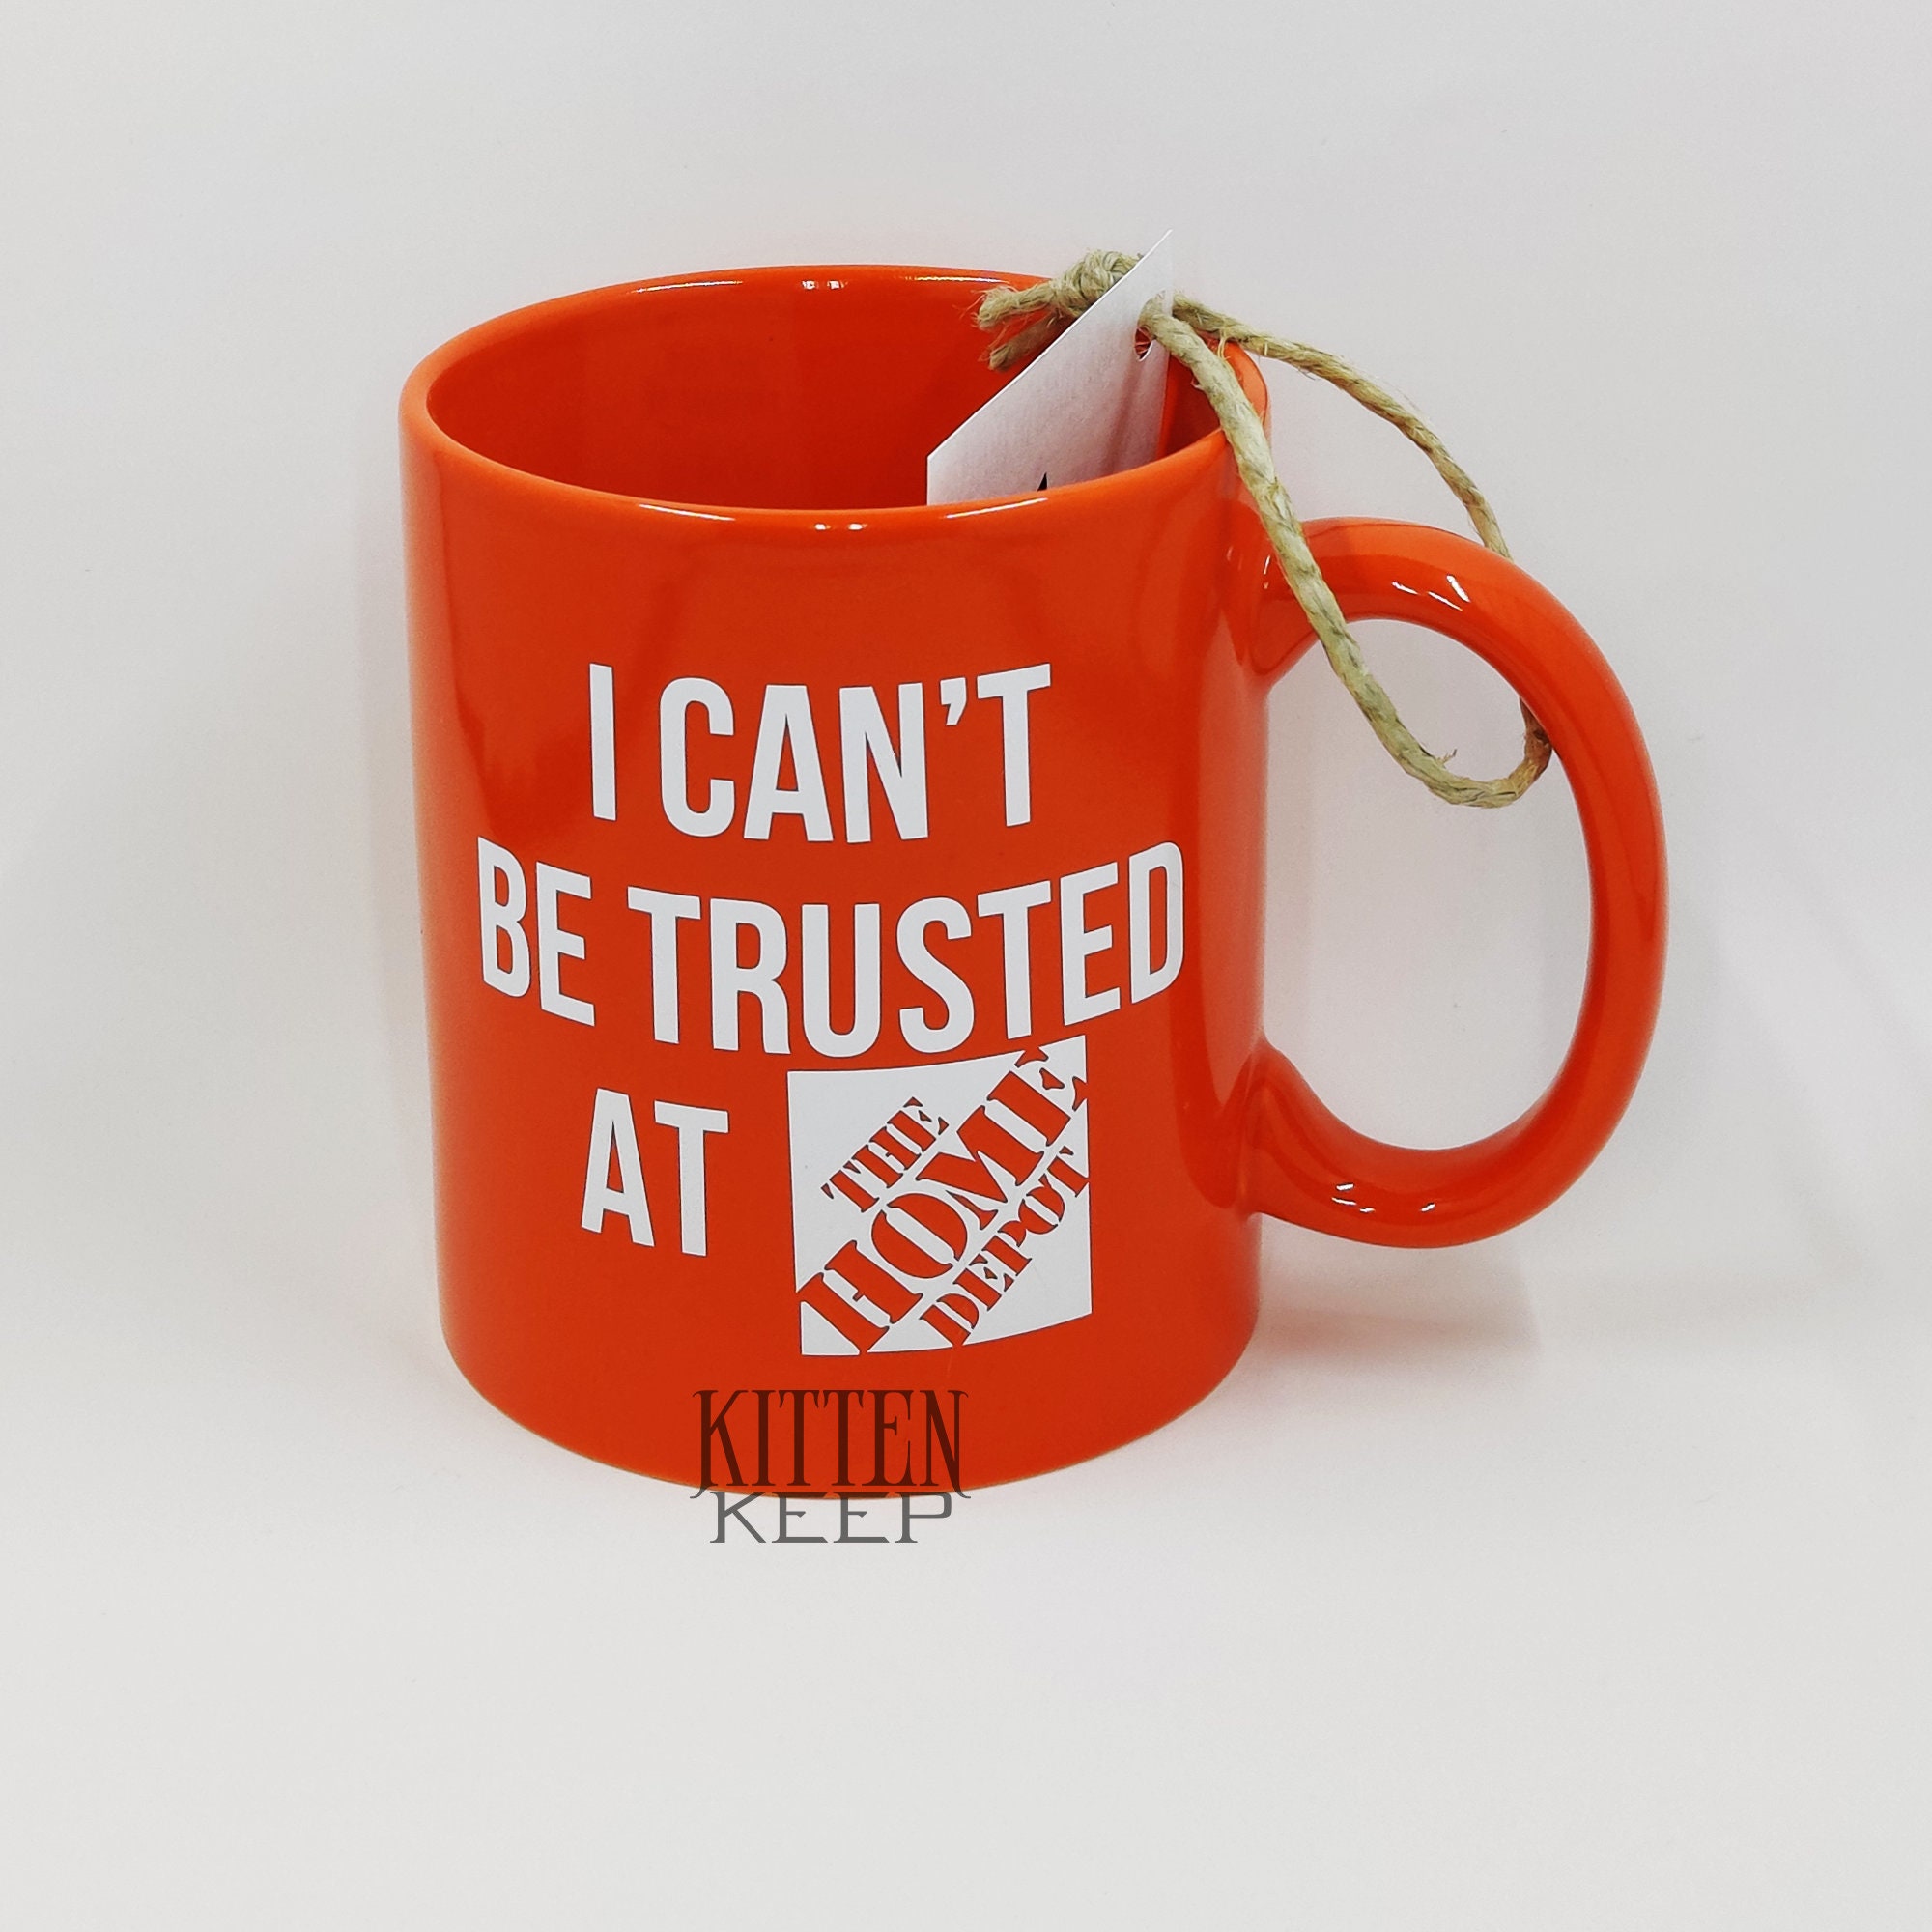 I Can’t Be Trusted At (Home Improvement Store) Coffee Mug